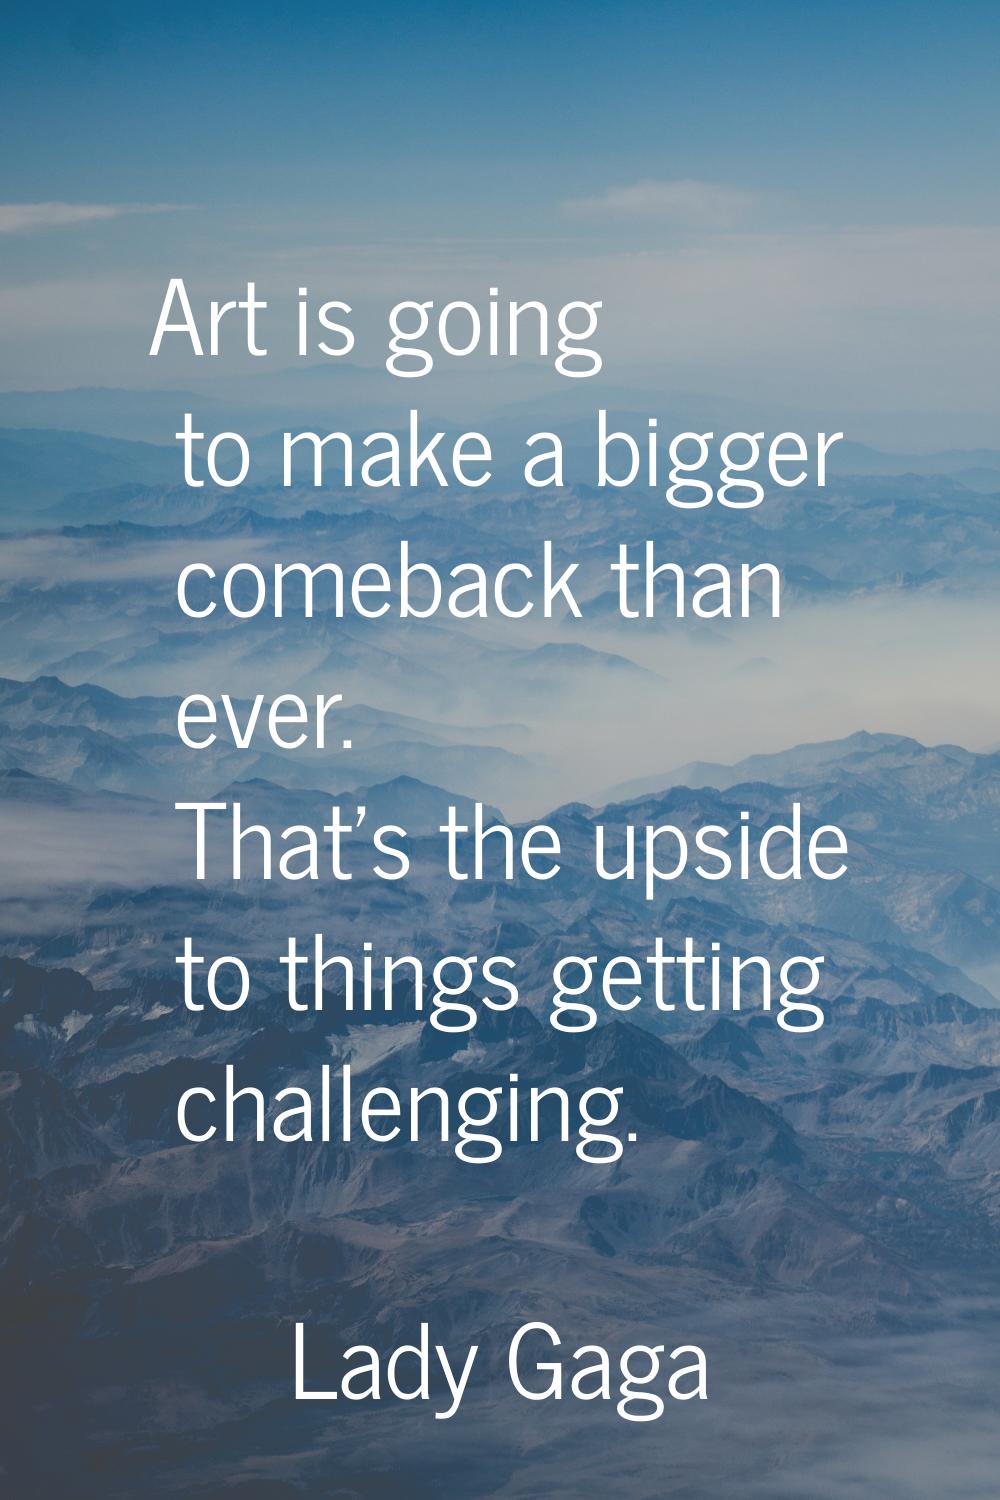 Art is going to make a bigger comeback than ever. That's the upside to things getting challenging.